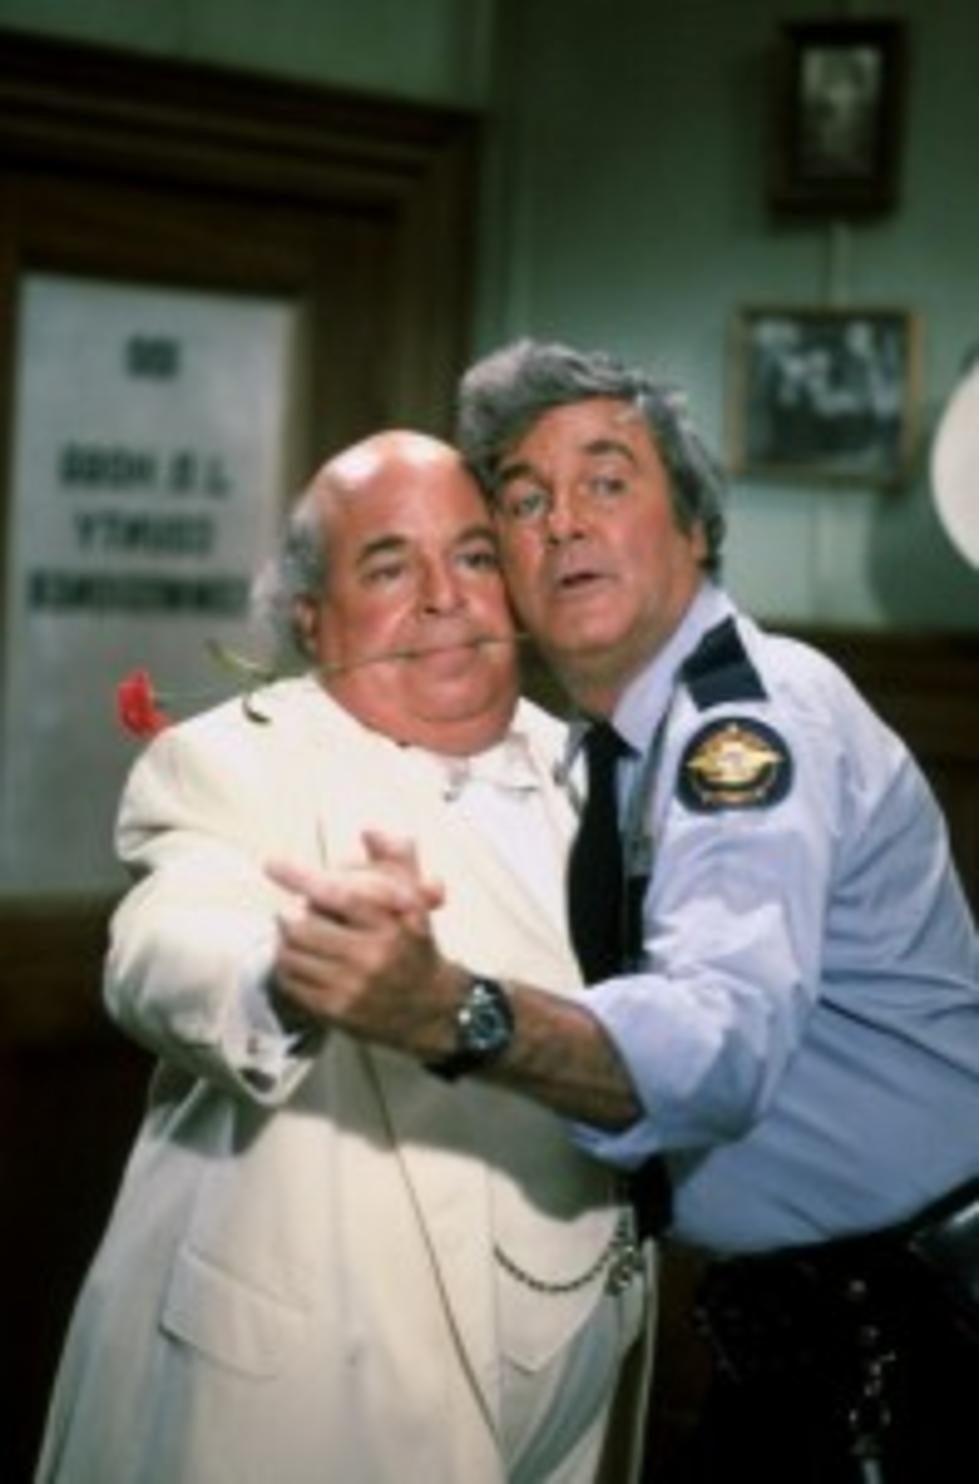 A Little of My Childhood Just Died With James Best, Better Known as Roscoe P Coltrane